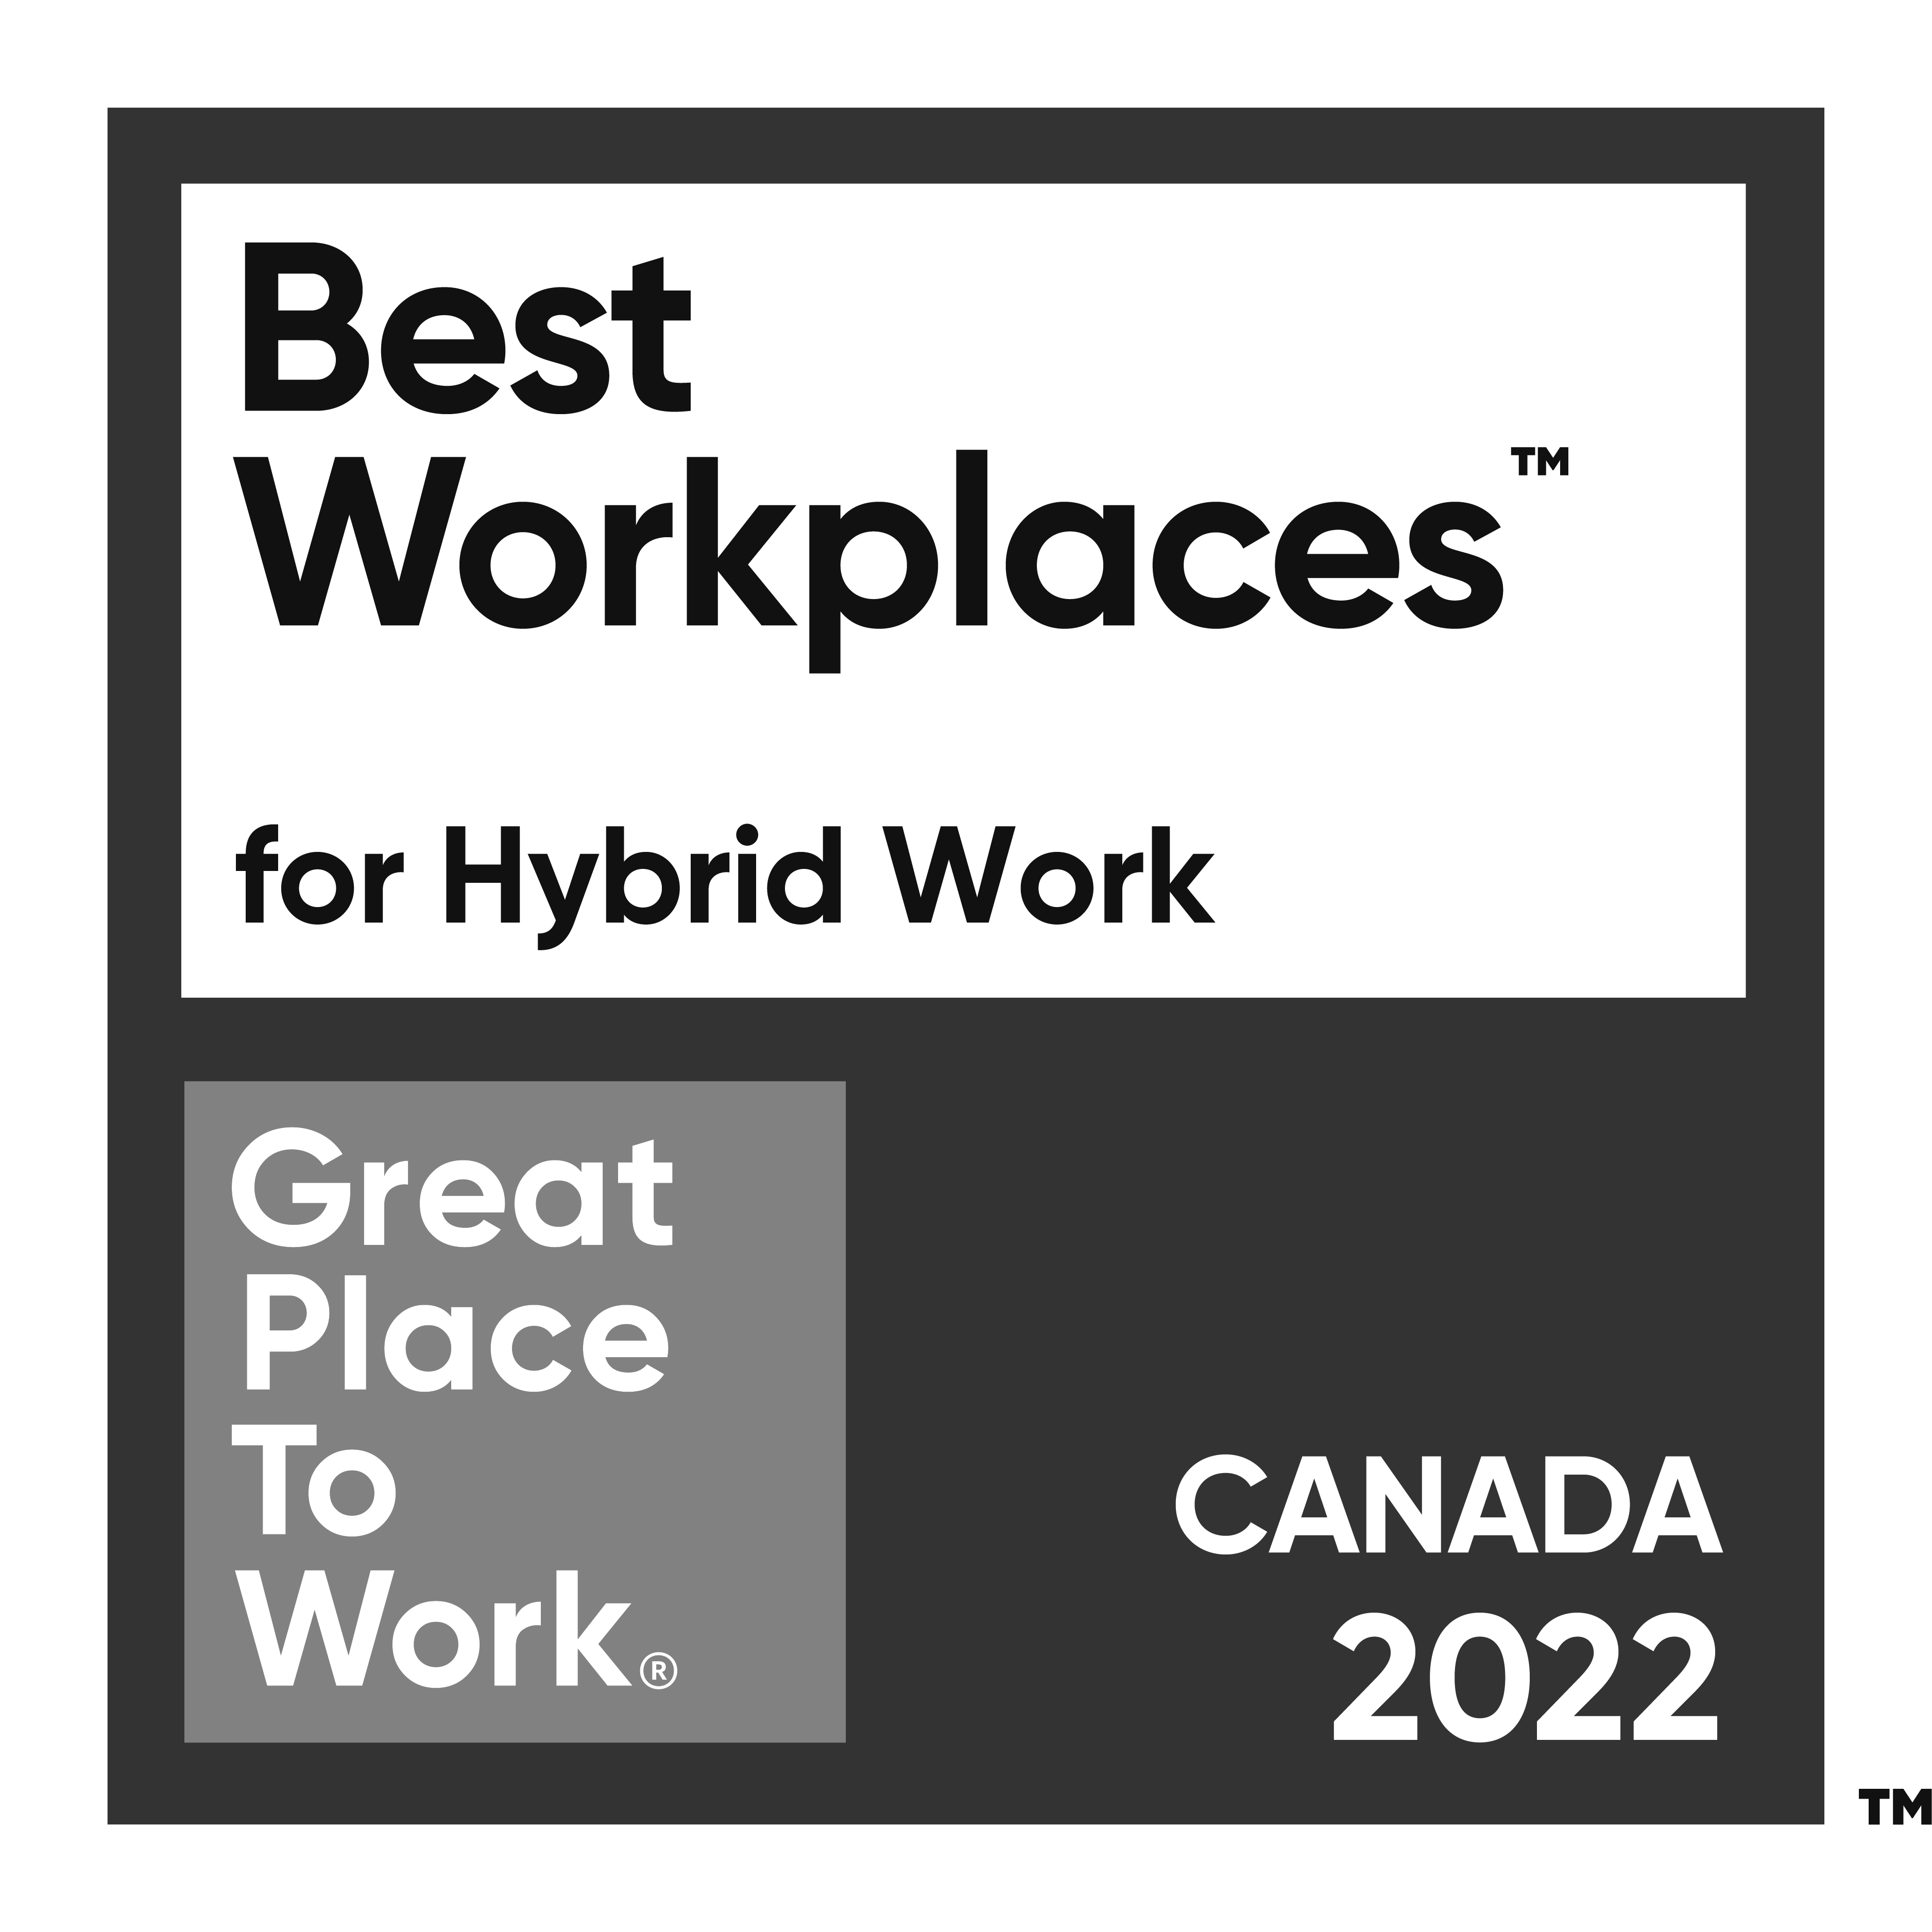 Best Workplaces for Hybrid Work 2022 logo (black and white)